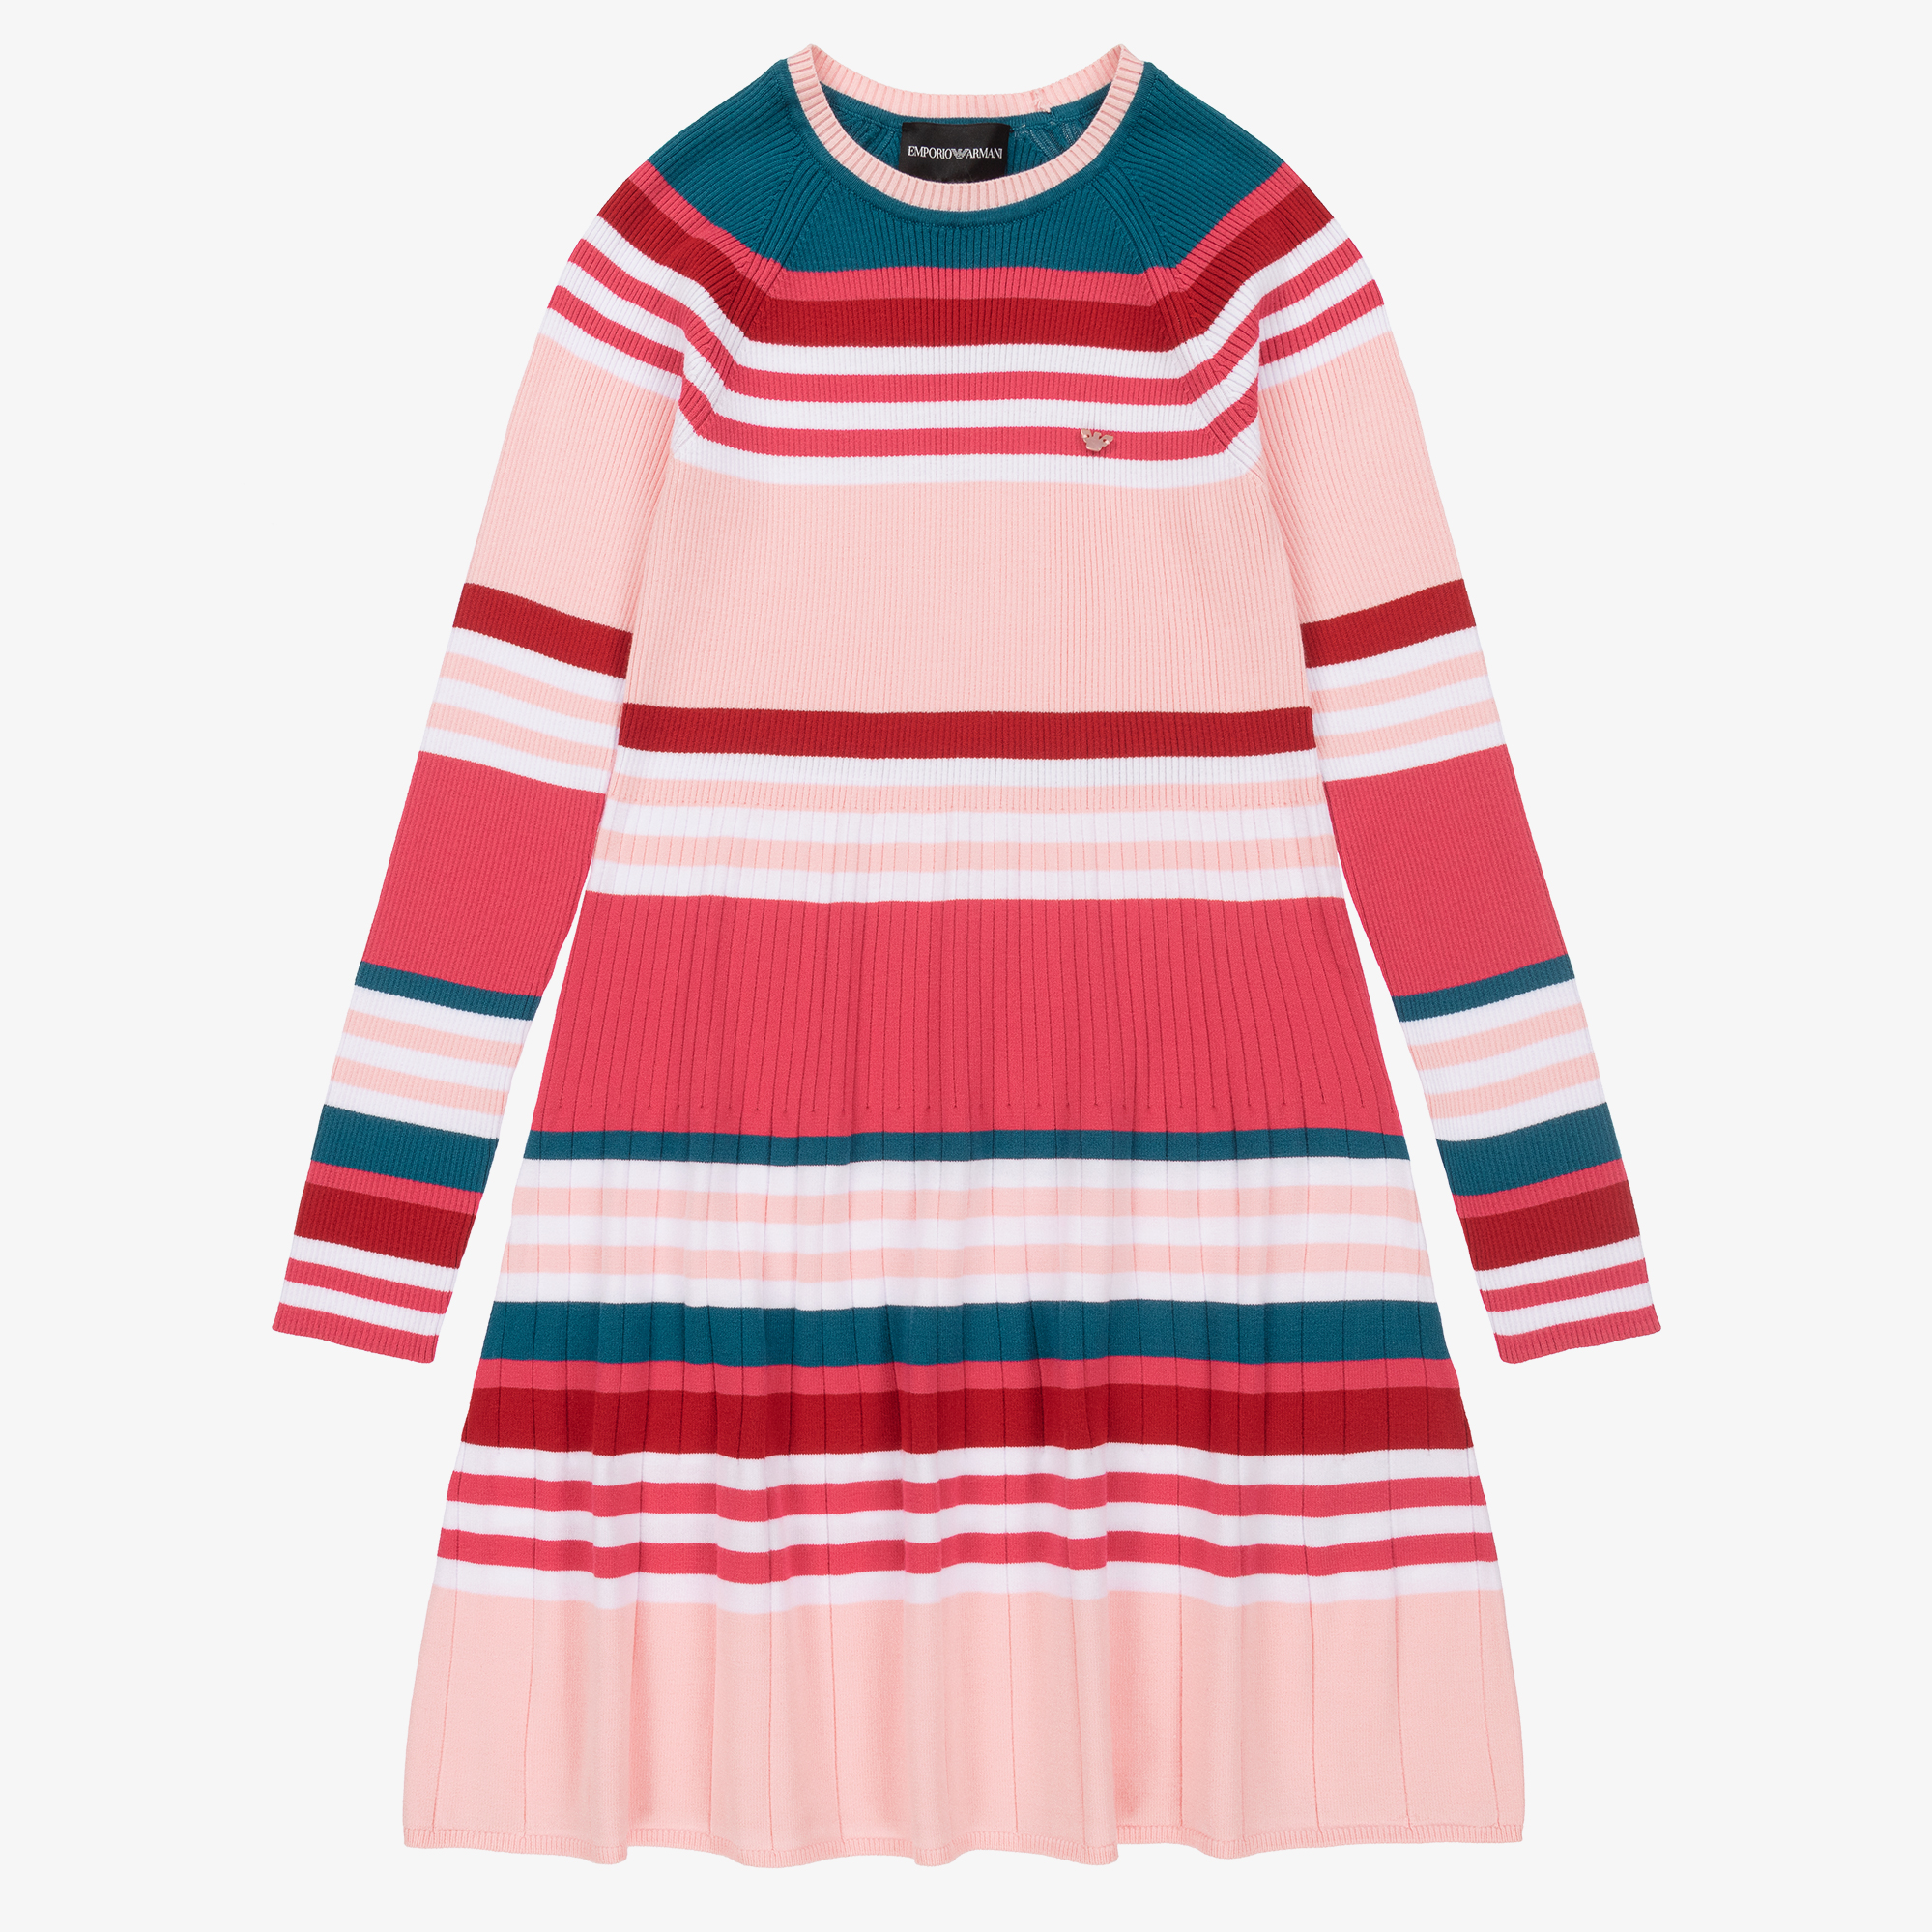 Emporio Armani Teen Girls Pink & Red Knitted Dress